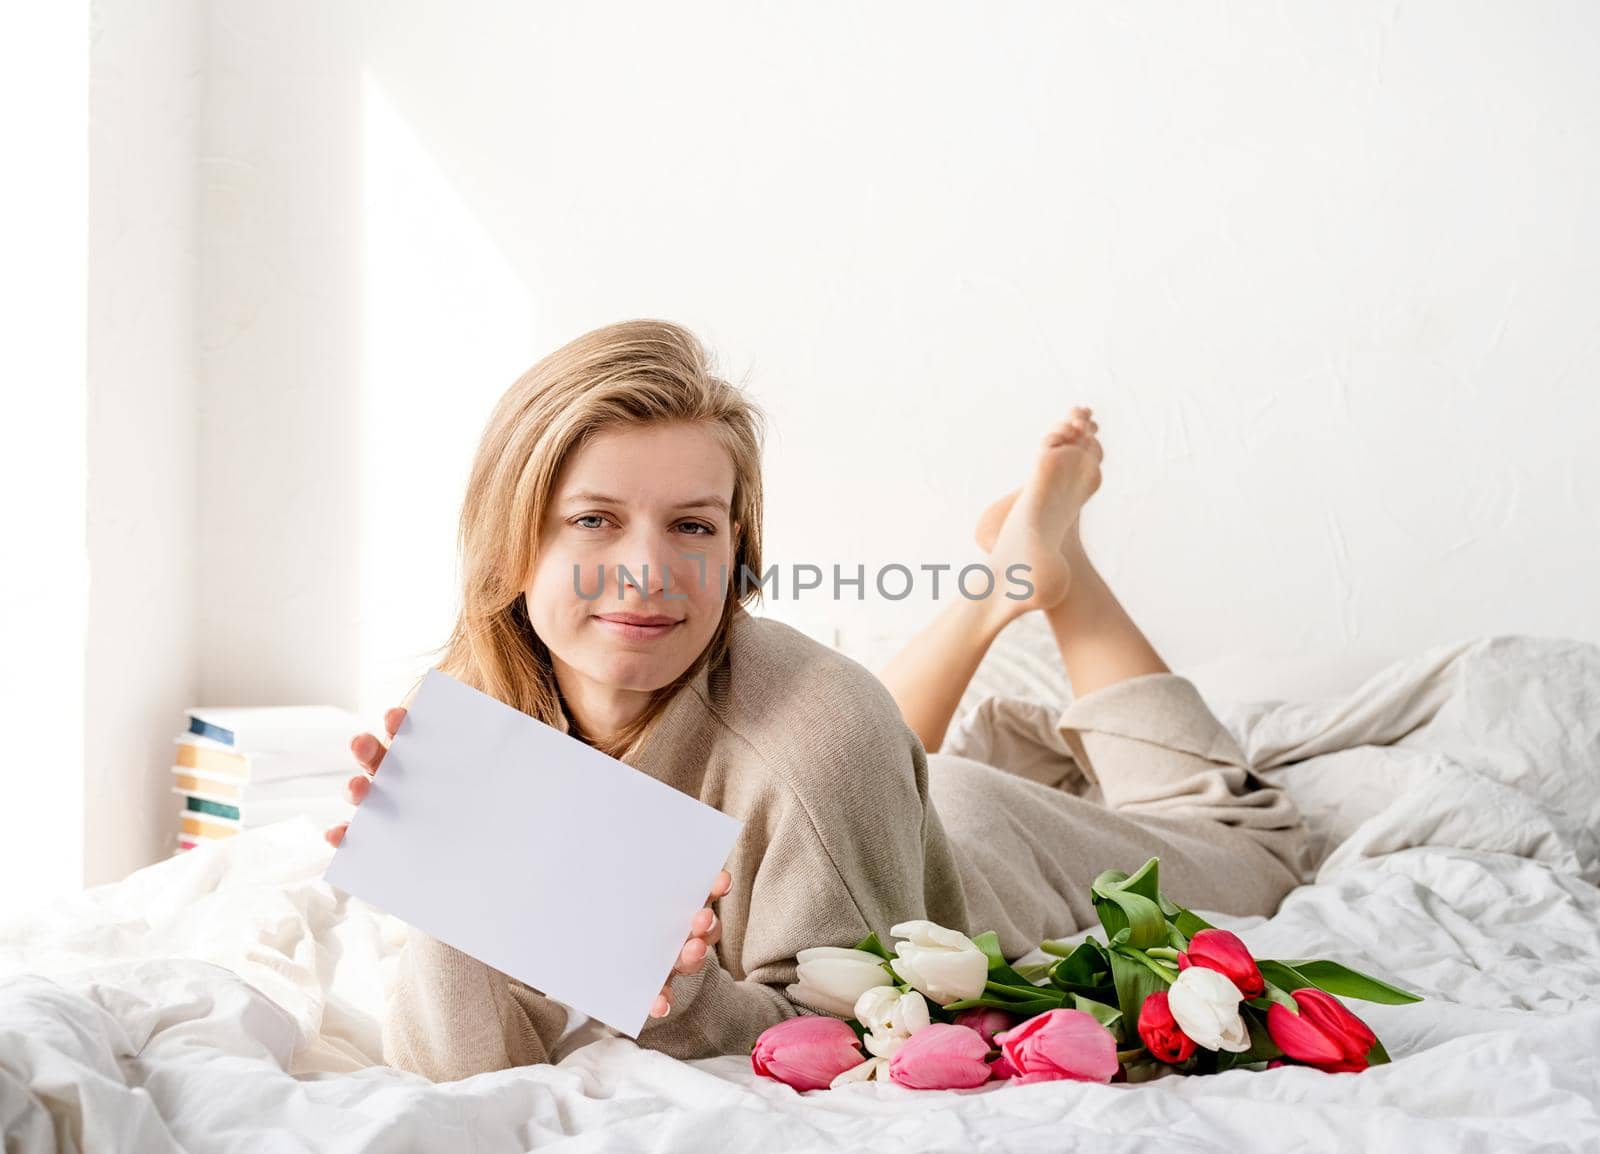 Happy woman lying on the bed wearing pajamas, holding tulip flowers bouquet and blank card for mock up design